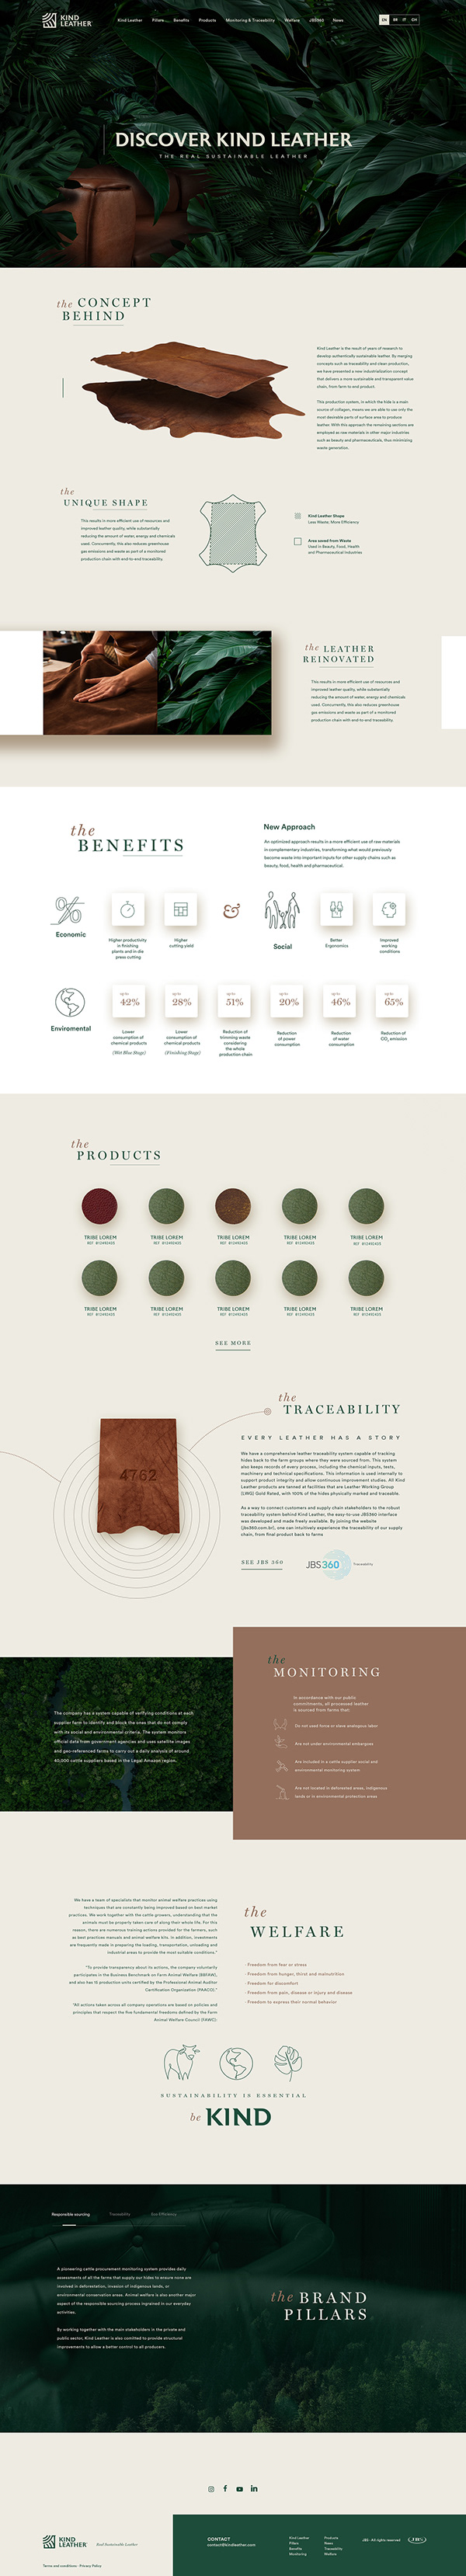 Kind Leather Brand Identity Design for JBS S.A.